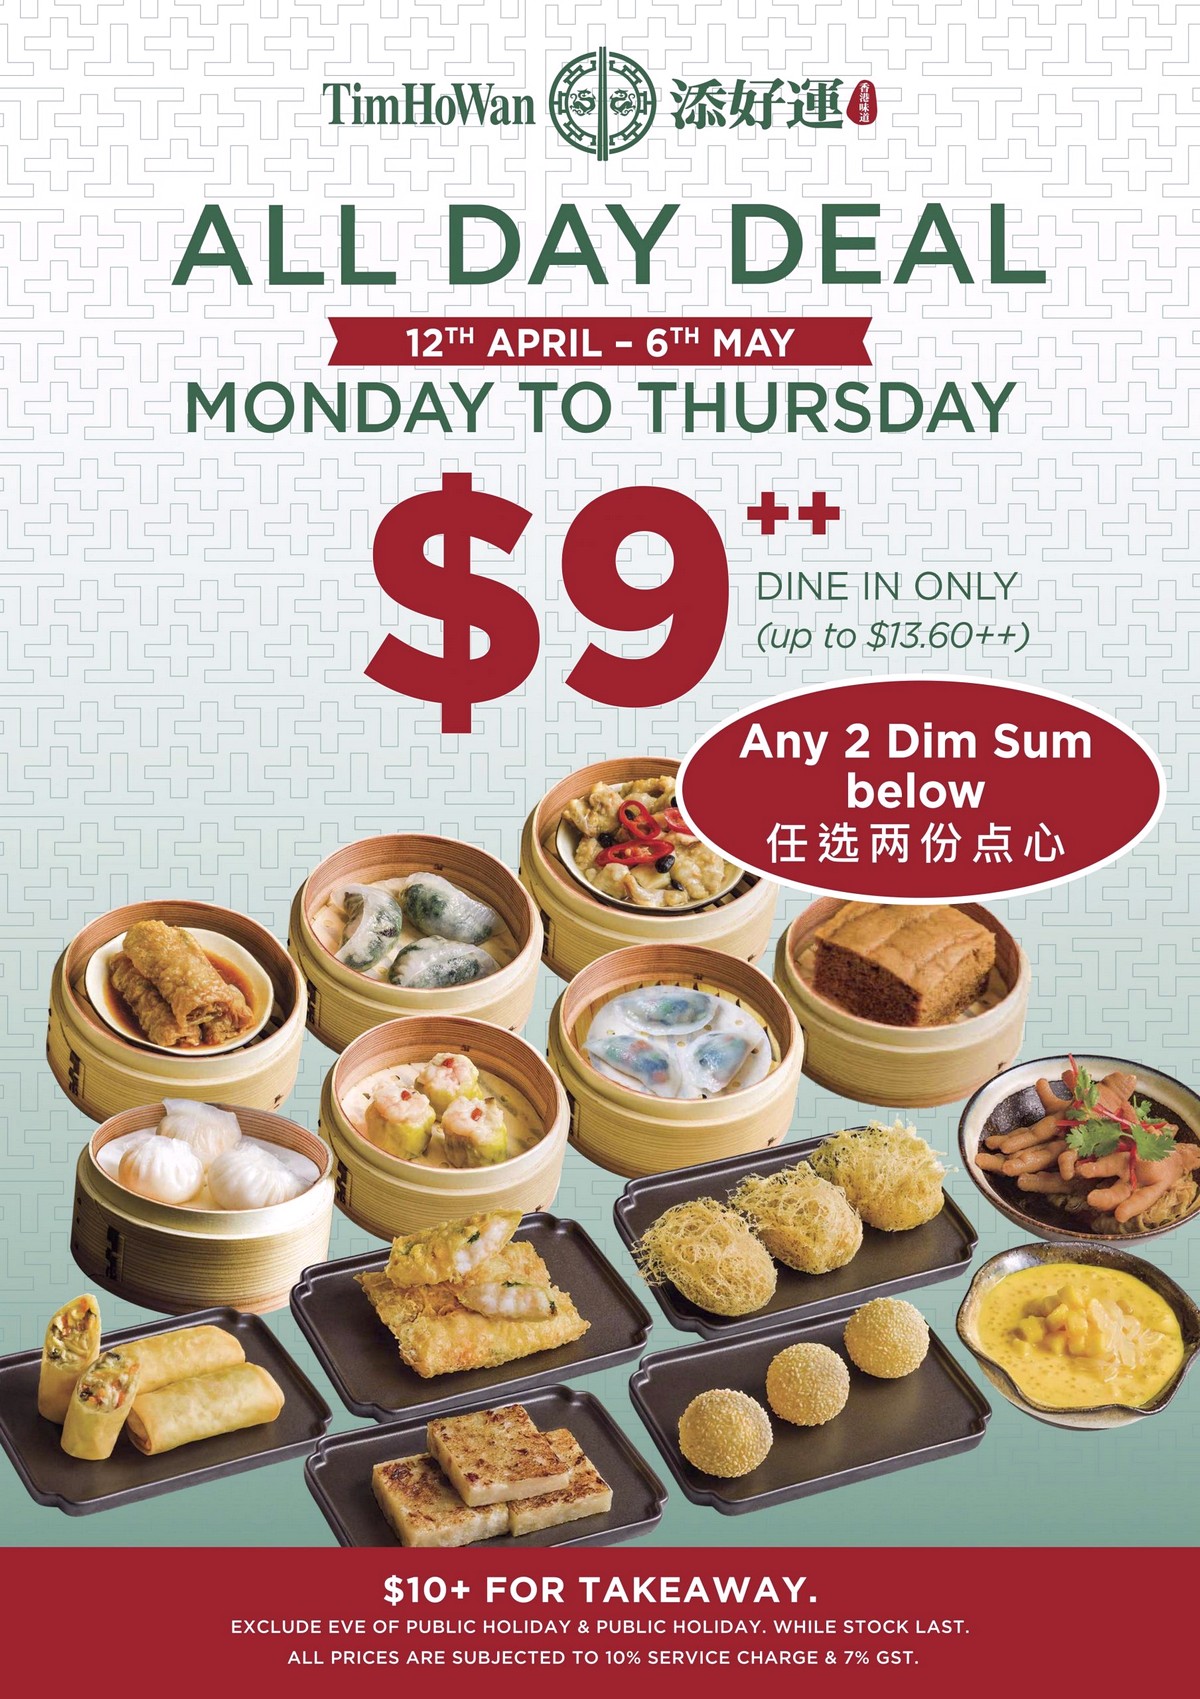 Tim-Ho-Wans-All-Day-Dim-Sum-Deal-1-scaled-1 12 Apr-6 May 2021: Up to 30% off: $9 for any 2 selected dim sum at Tim Ho Wan